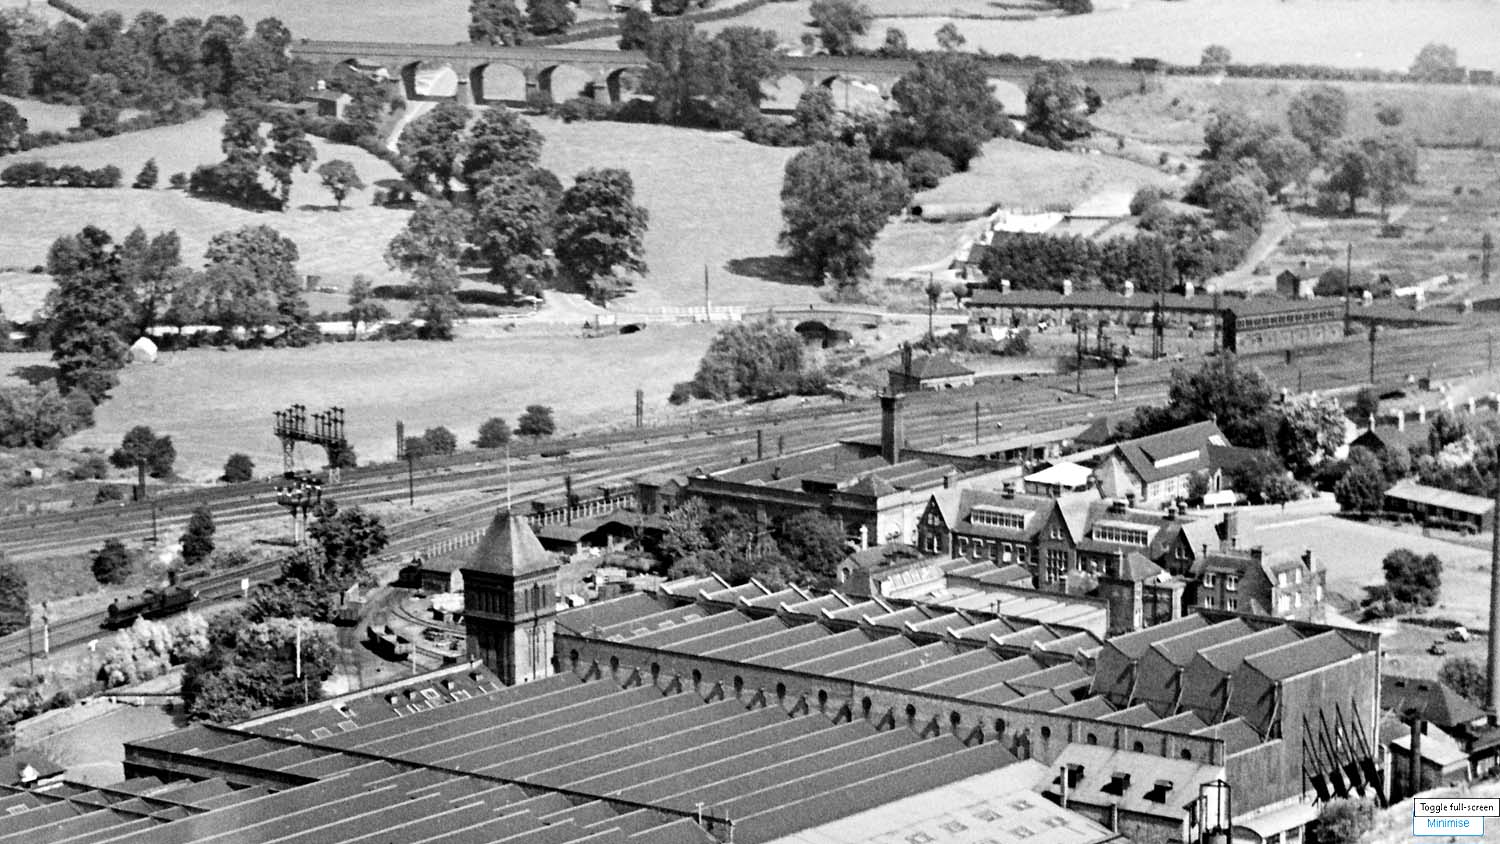 A 1930 aerial view of the Leamington branch's junction with the TVR and L&BR with the original Rugby No 7 Signal Cabin on the right